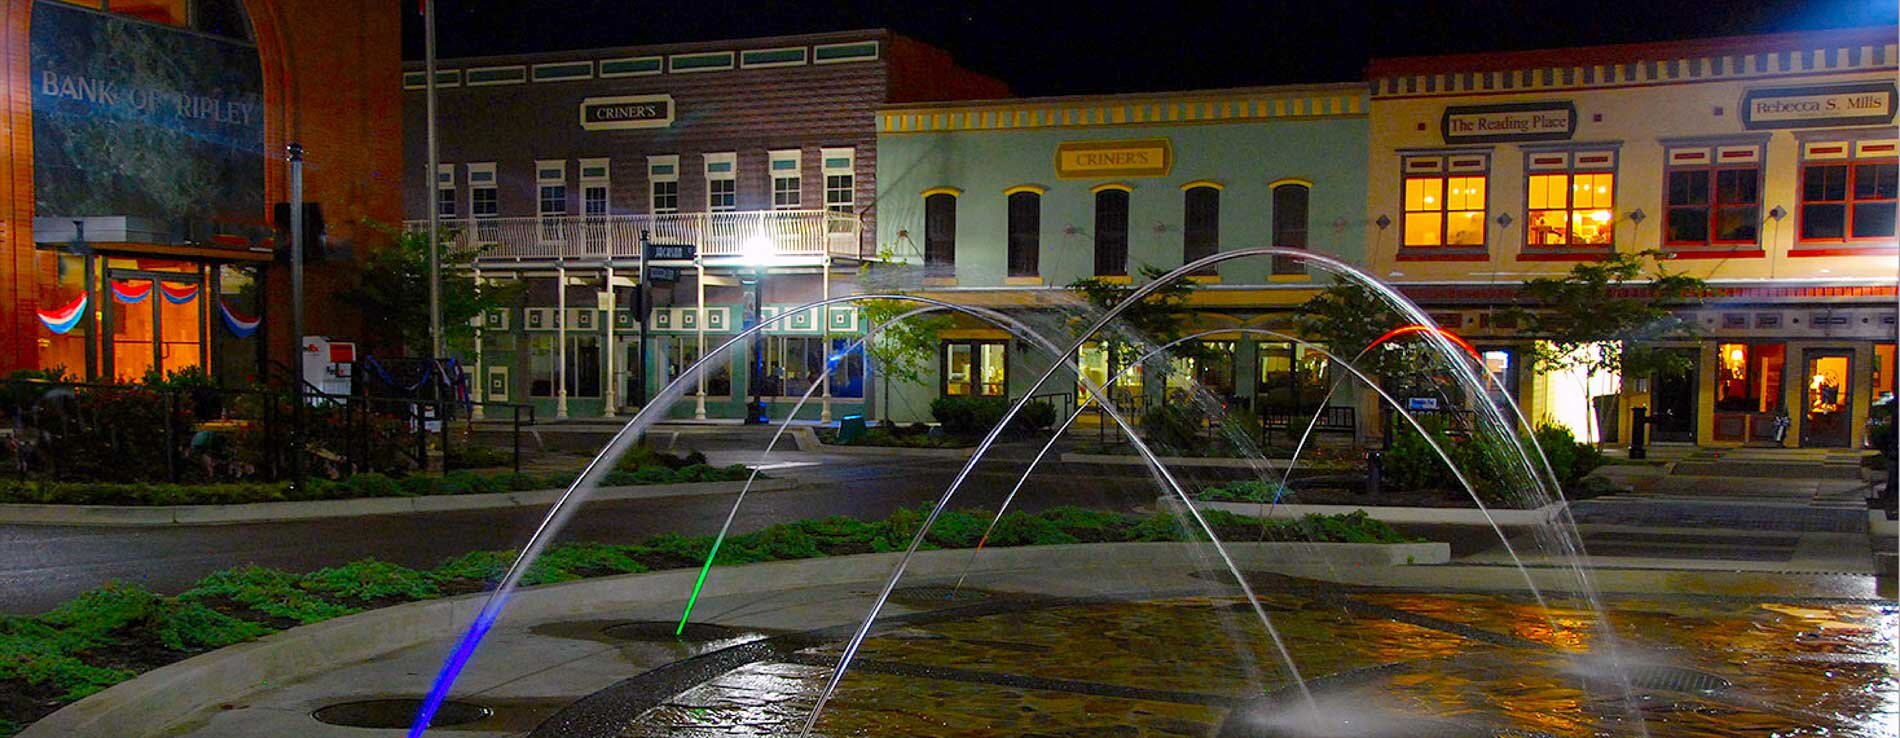 Downtown Ripley Fountains at Night